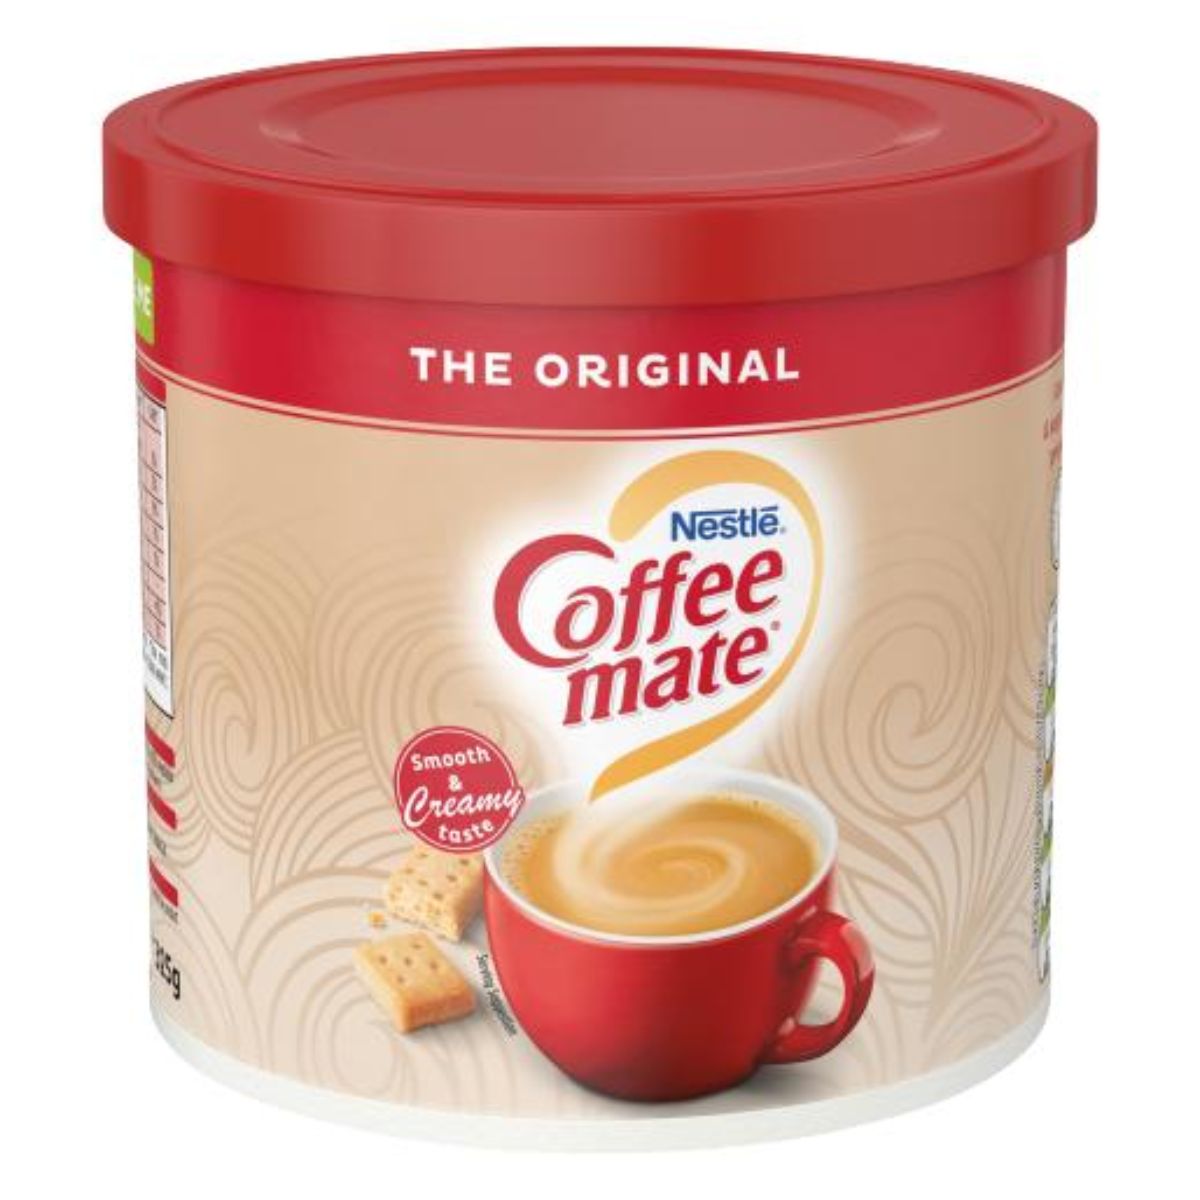 Nestle - Coffee Mate The Original - 325g in a can.